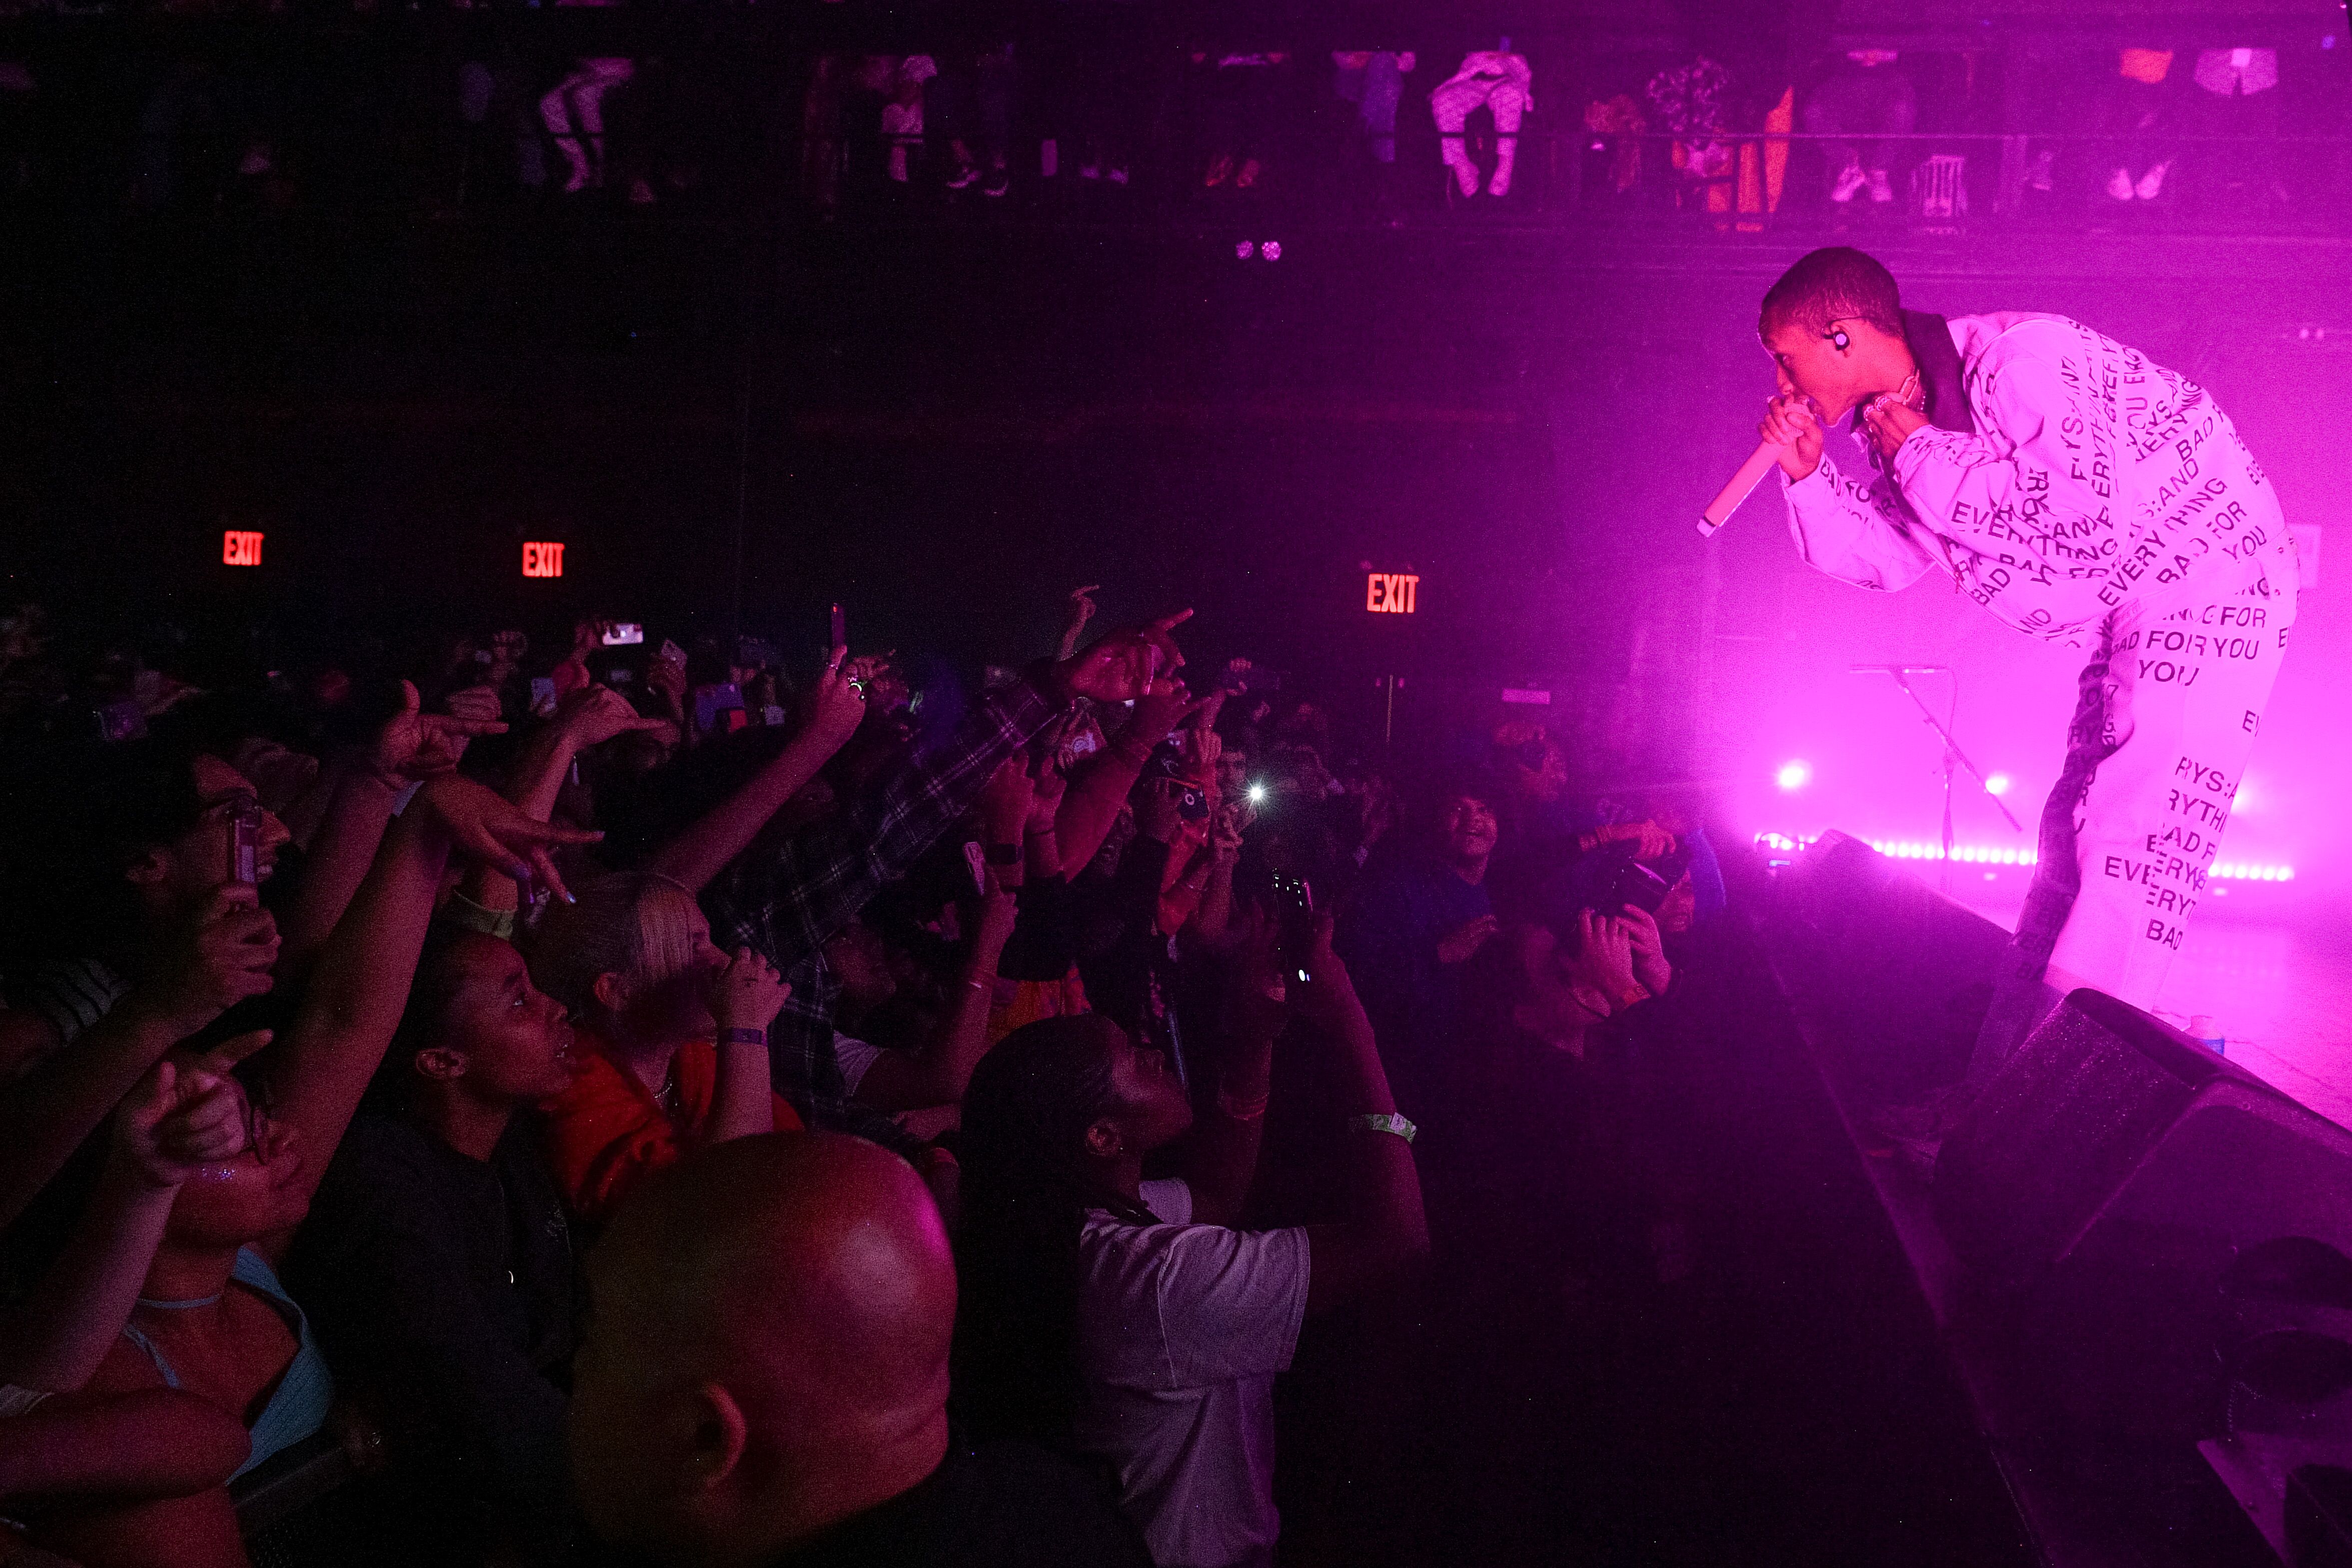 Jaden Smith performing at a concert | Source: Getty Images/GlobalImagesUkraine